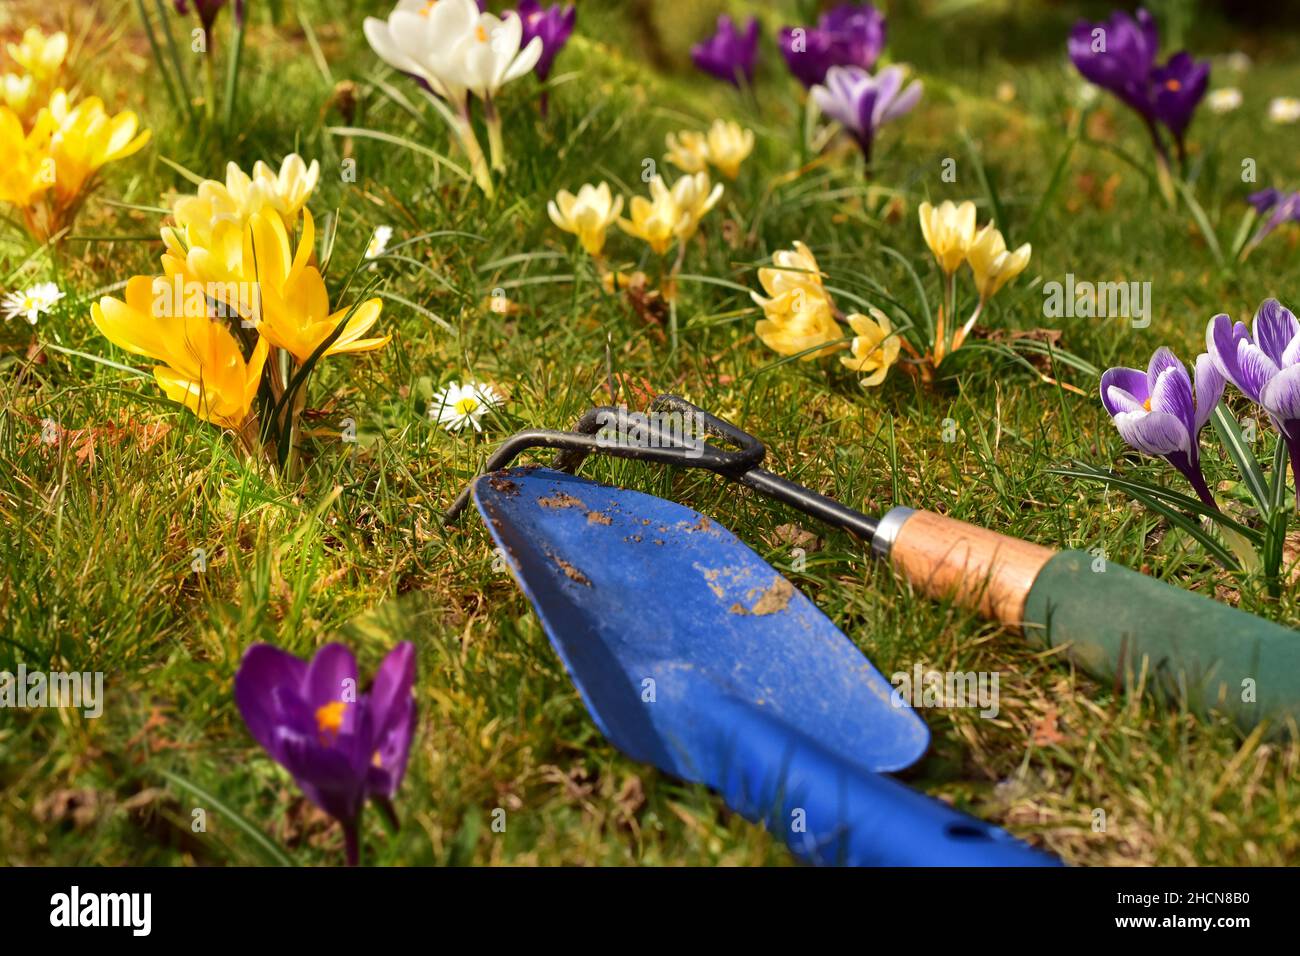 grass and flowers from above with a blue shovel Stock Photo